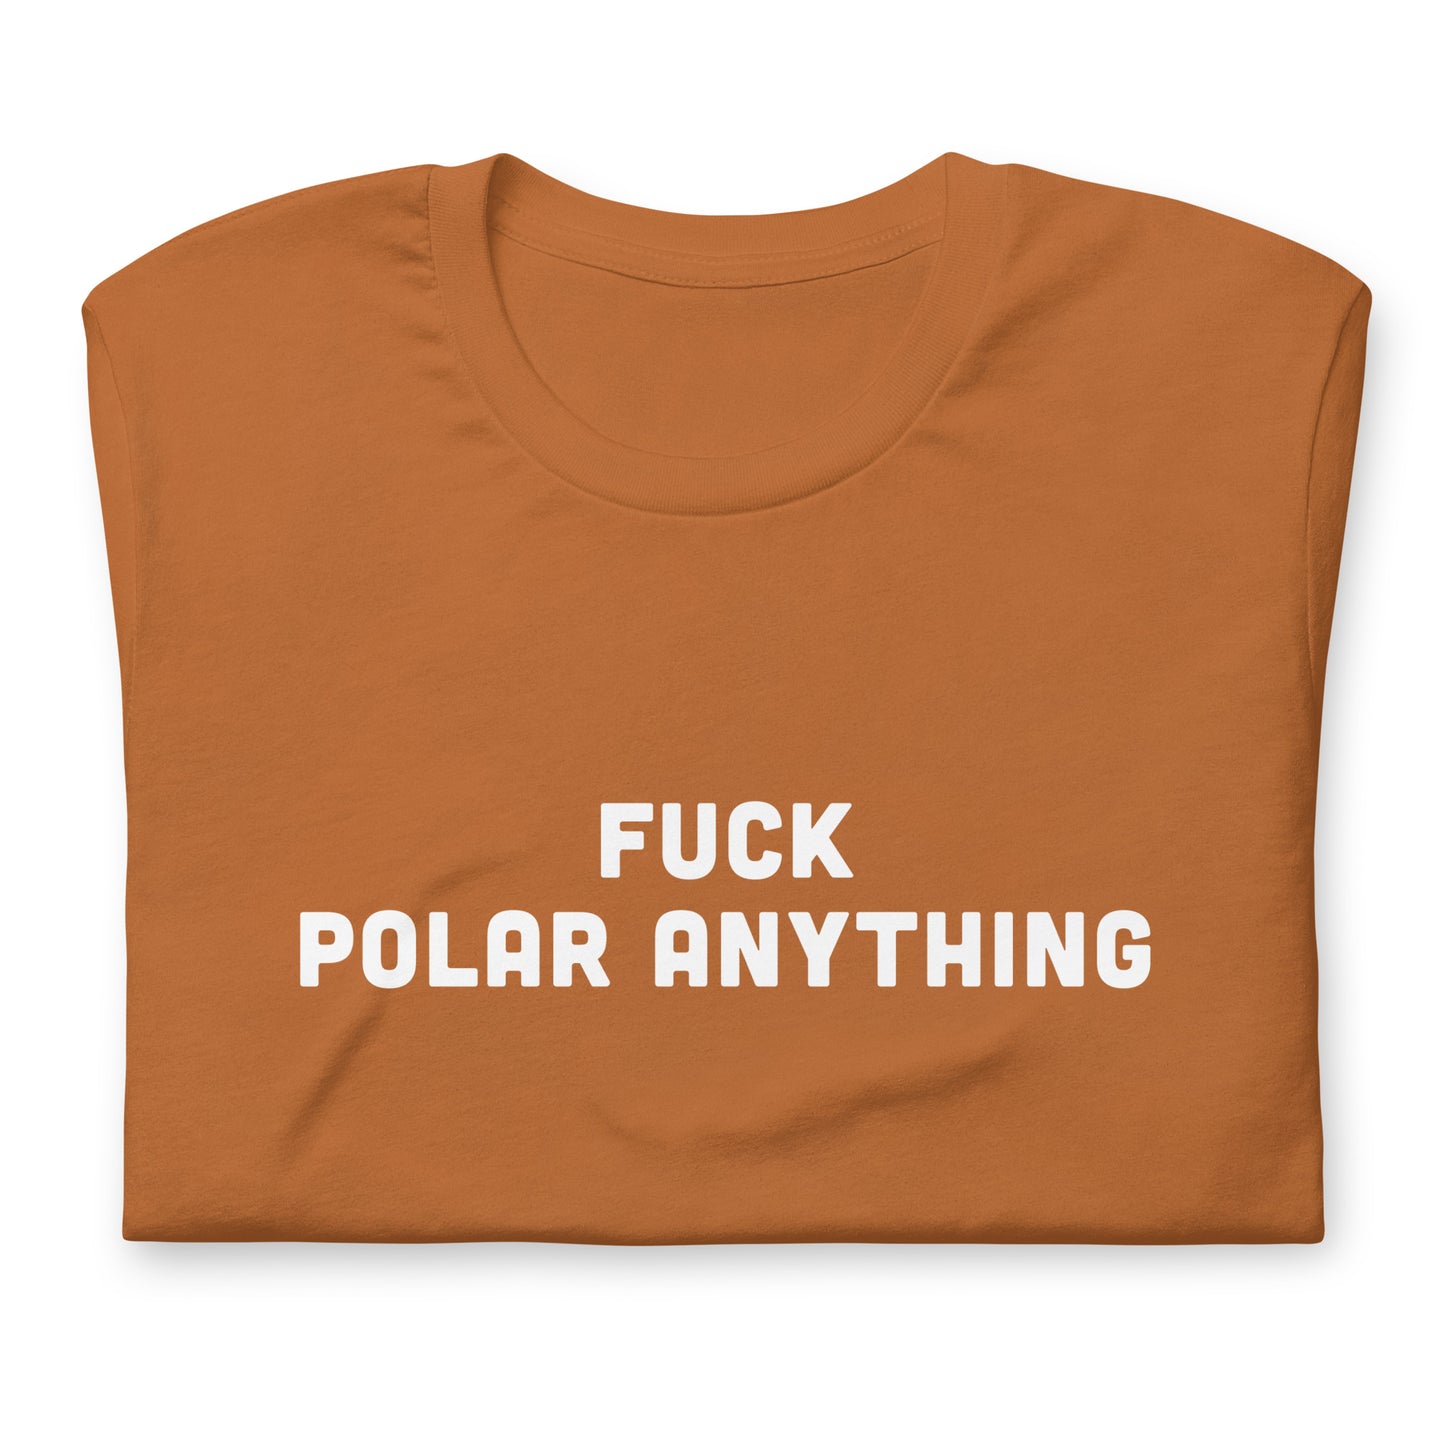 Fuck Polar Anything T-Shirt Size XL Color Navy